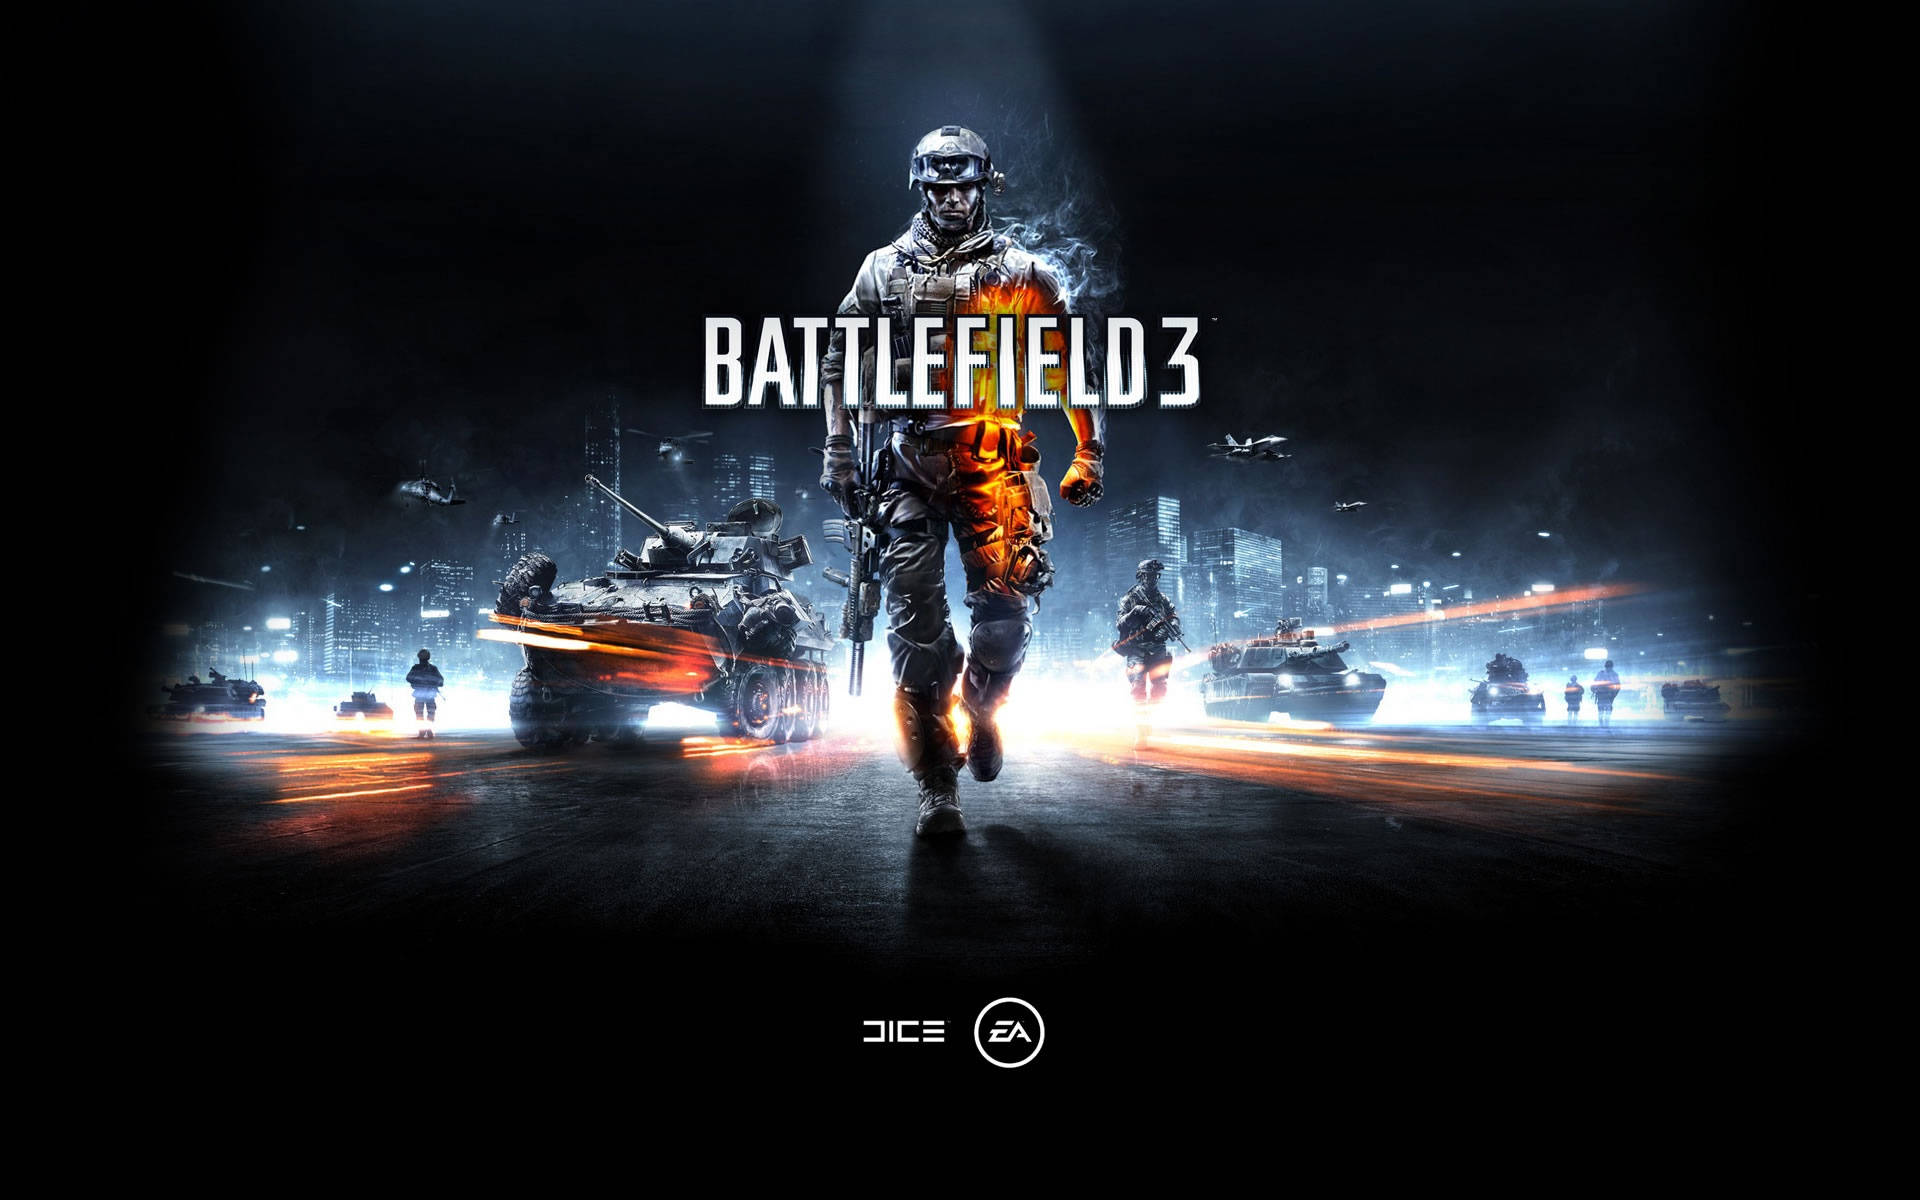 Battlefield 3 Gaming Poster Background